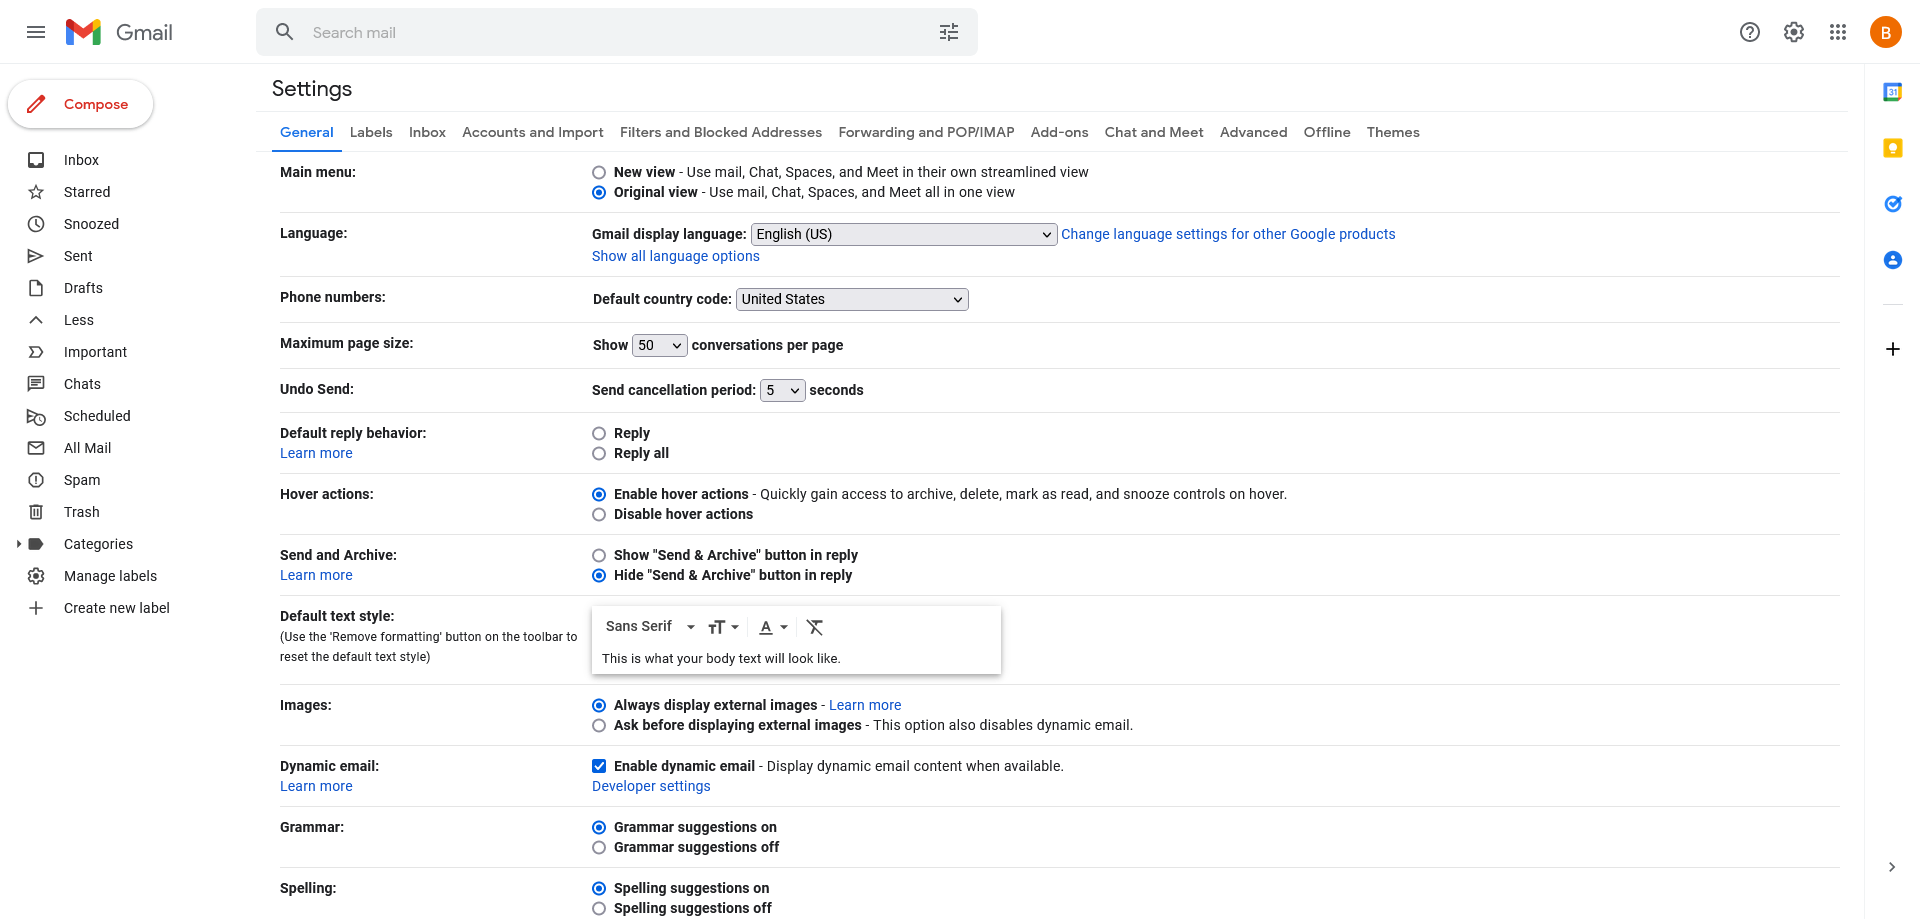 General settings page in Gmail's old design